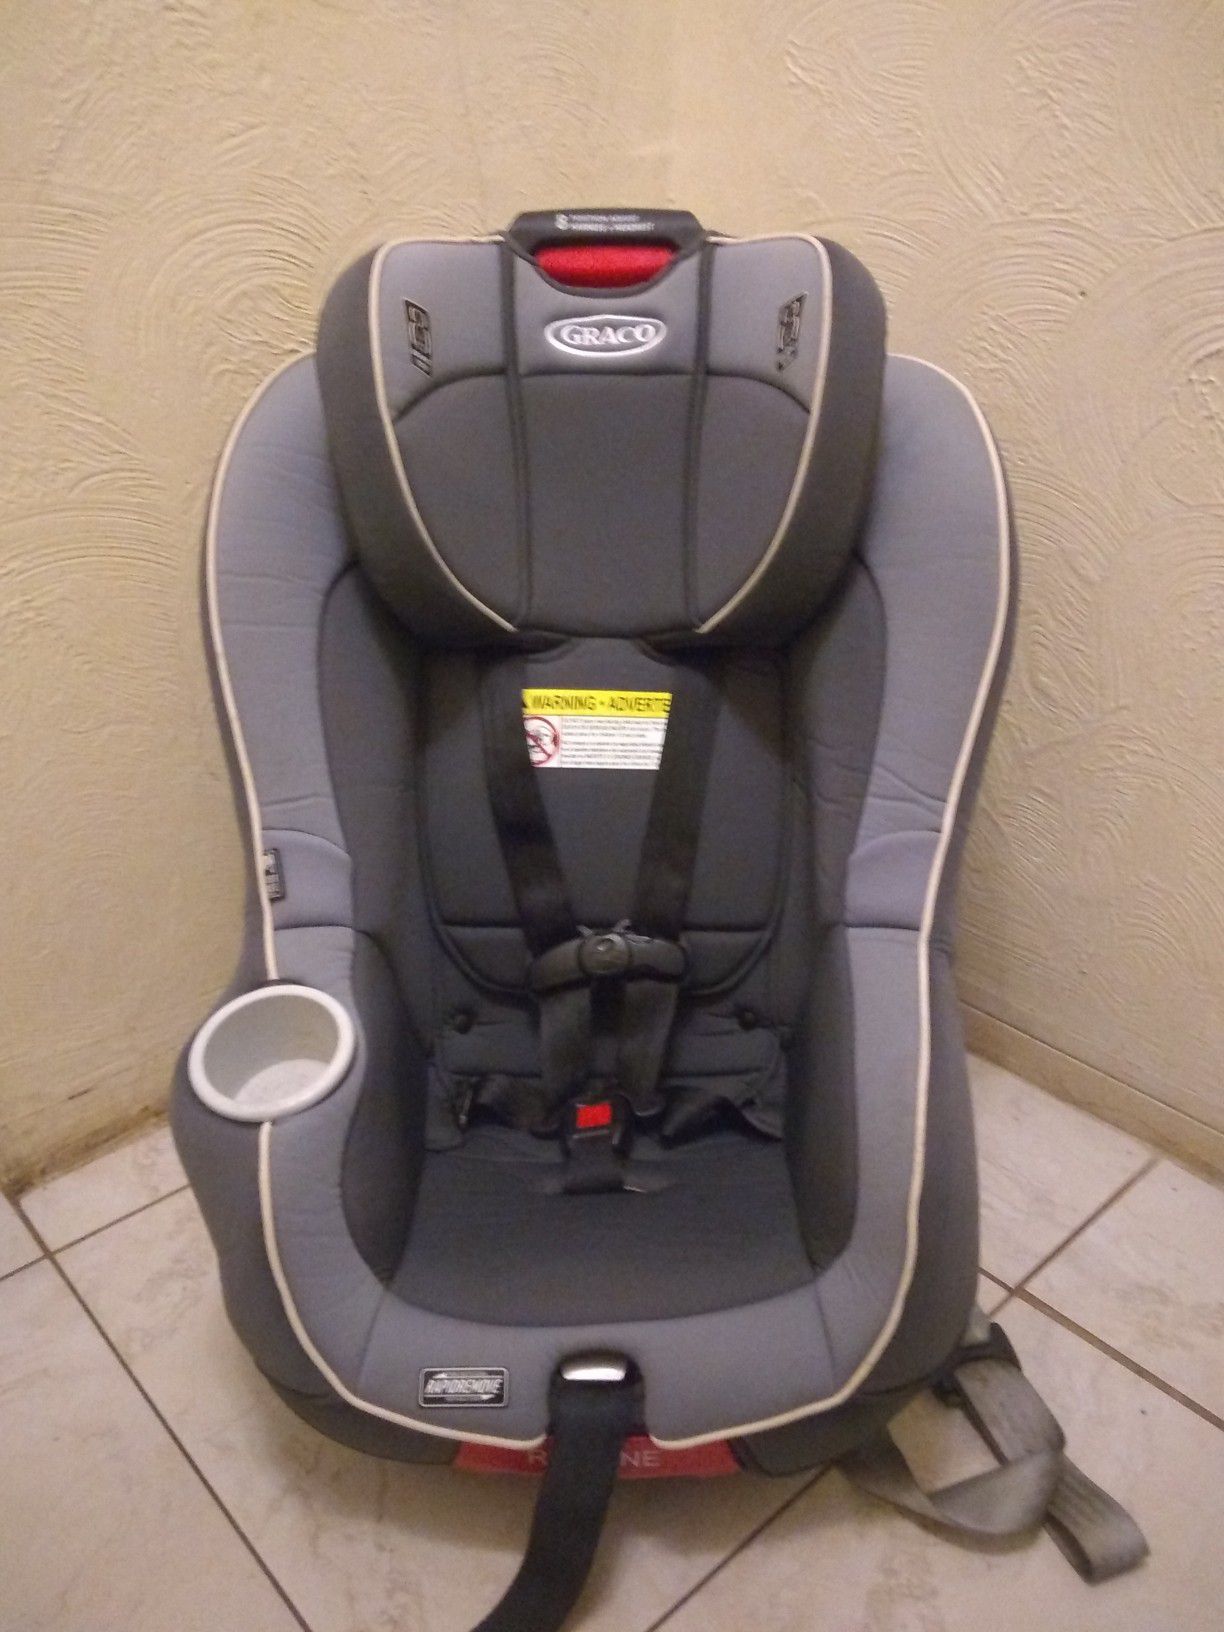 Graco car seat/booster